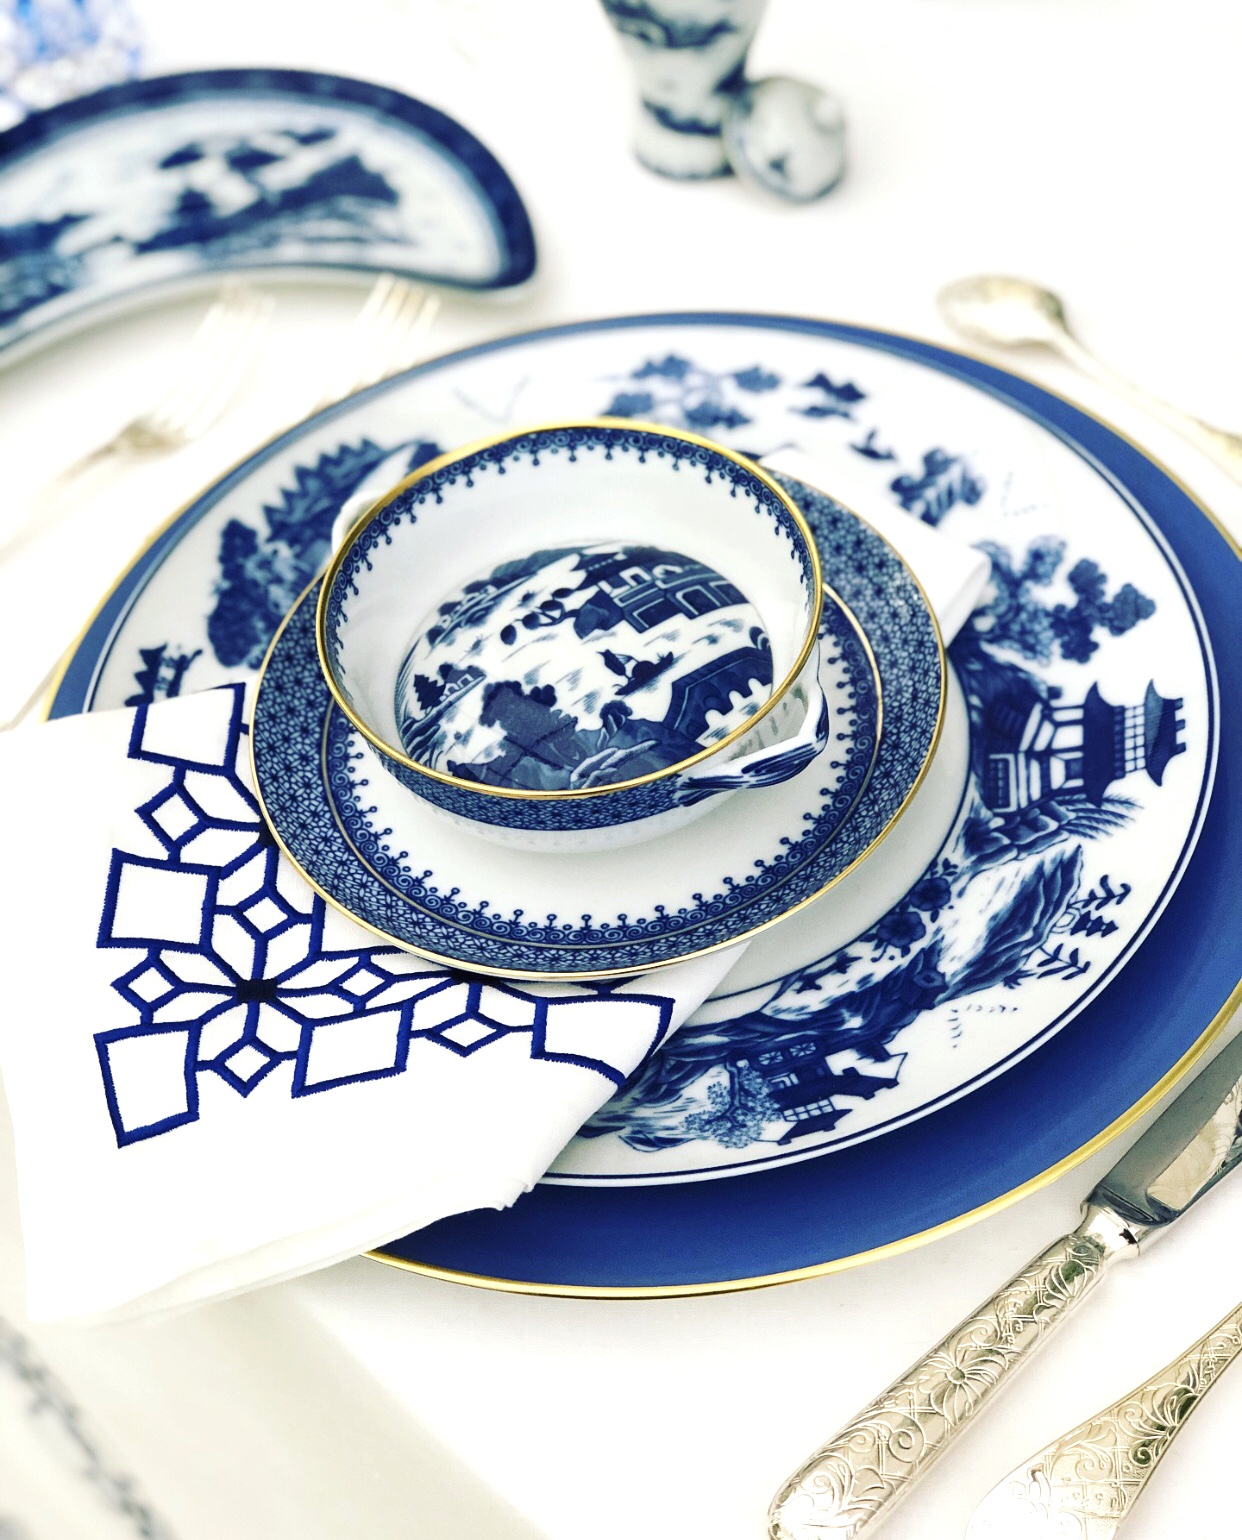 Blue and White Place setting